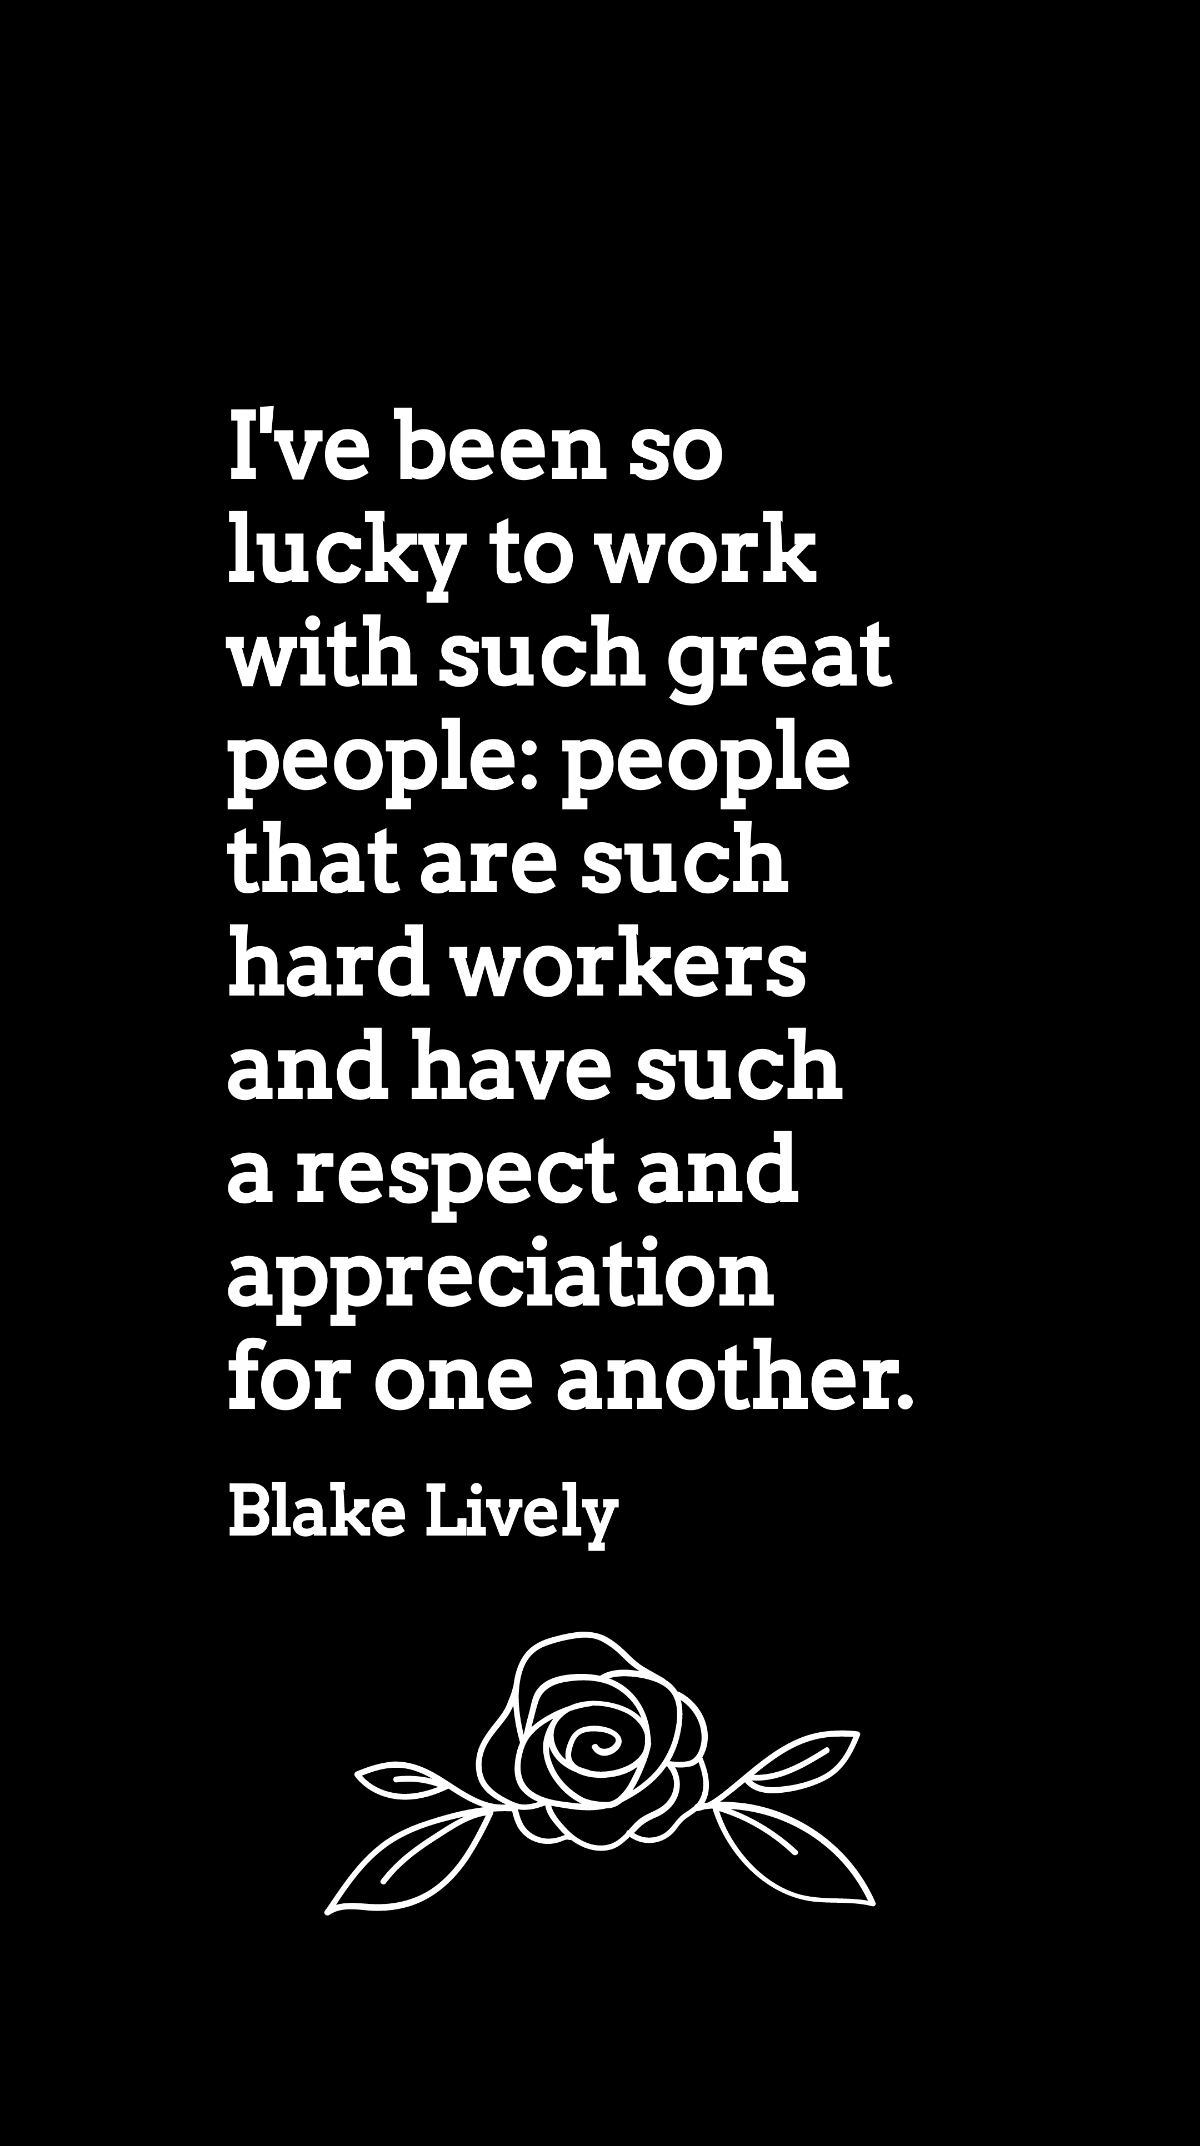 Blake Lively - I've been so lucky to work with such great people: people that are such hard workers and have such a respect and appreciation for one another. Template